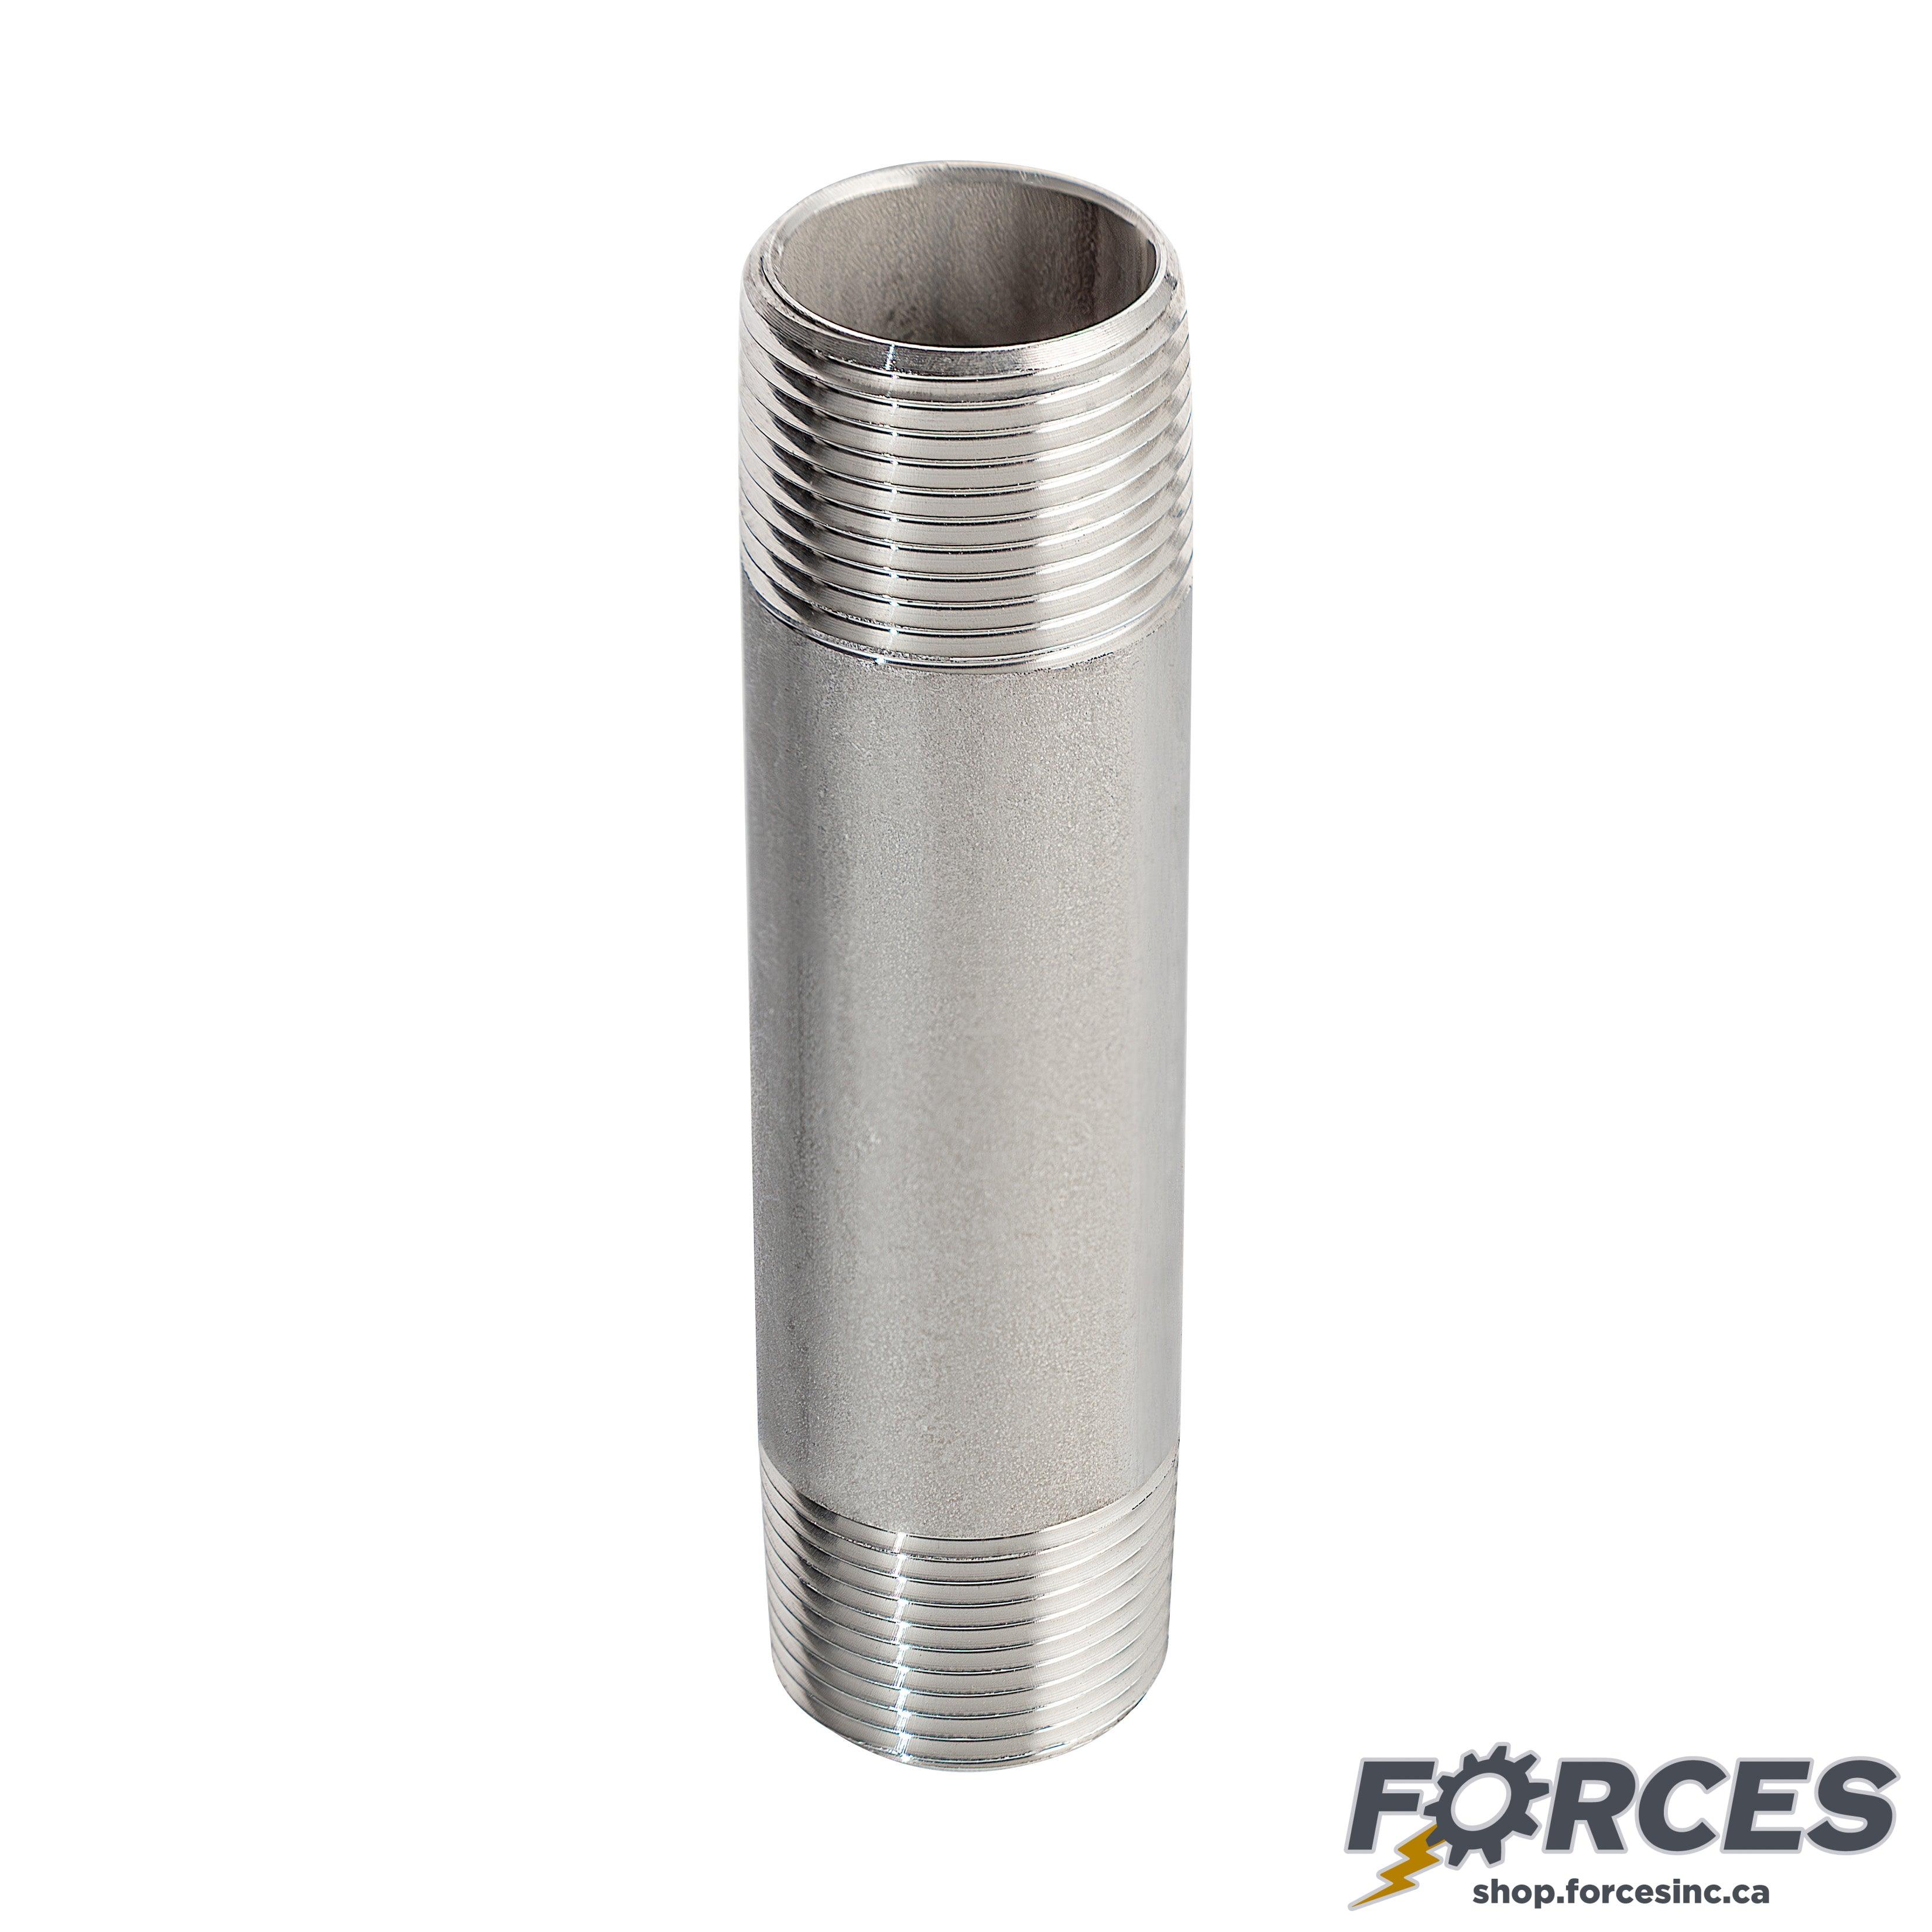 6" X 4" Long Nipple - Stainless Steel 316 - Forces Inc